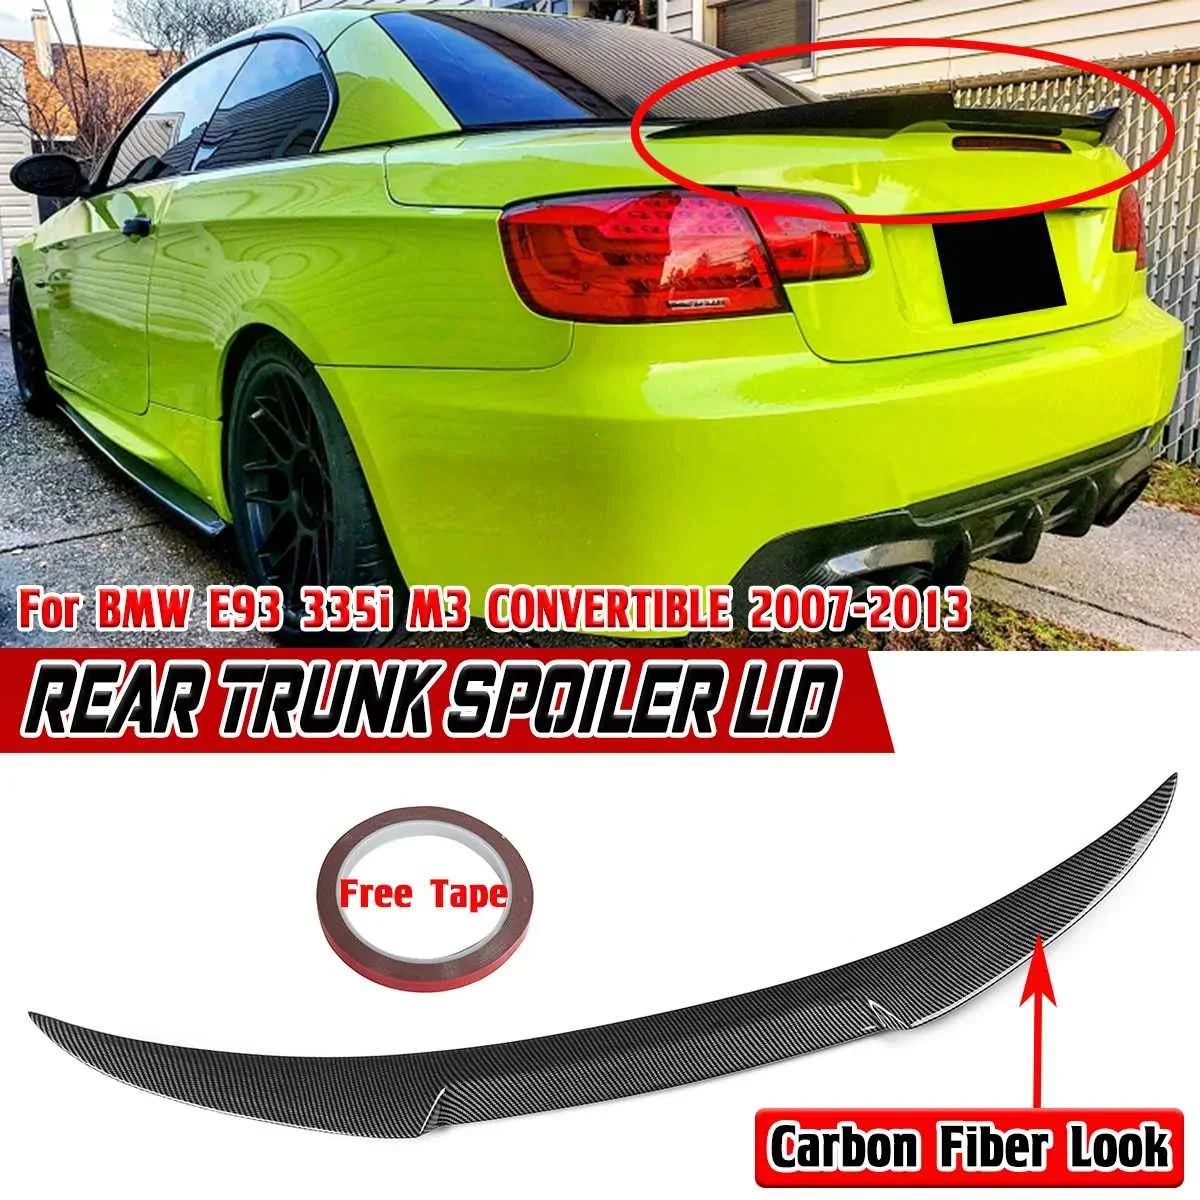 

Glossy Black/Carbon Fiber Look Car Rear Trunk Spoiler Lip M4 Style Rear Wing For BMW E93 335i M3 CONVERTIBLE 2007-2013 Body Kit